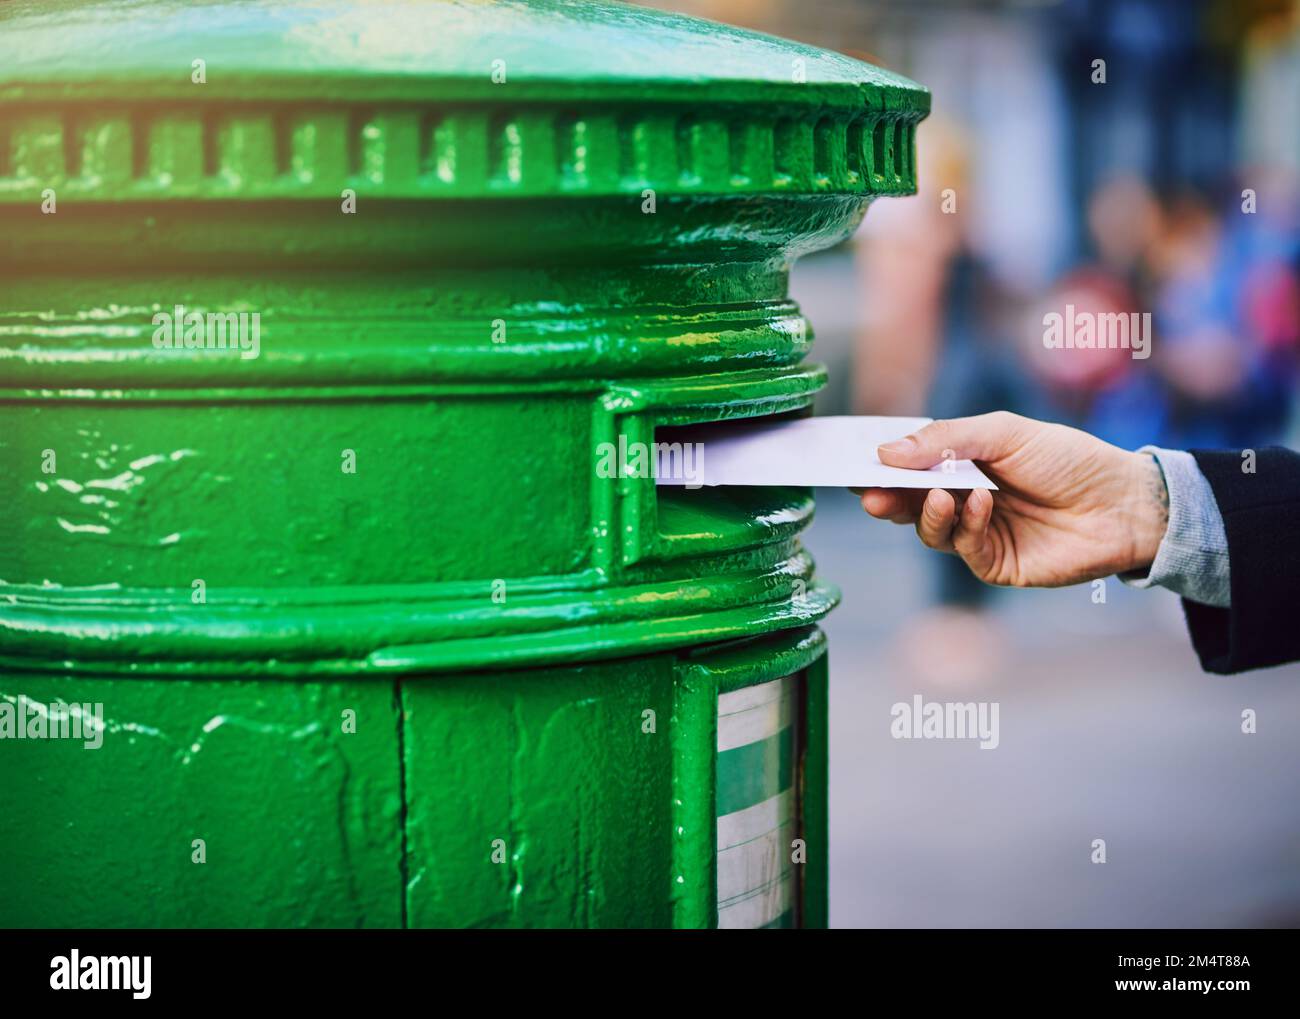 Theres still a place for snail mail in the world. a man posting mail into a postbox in the city. Stock Photo